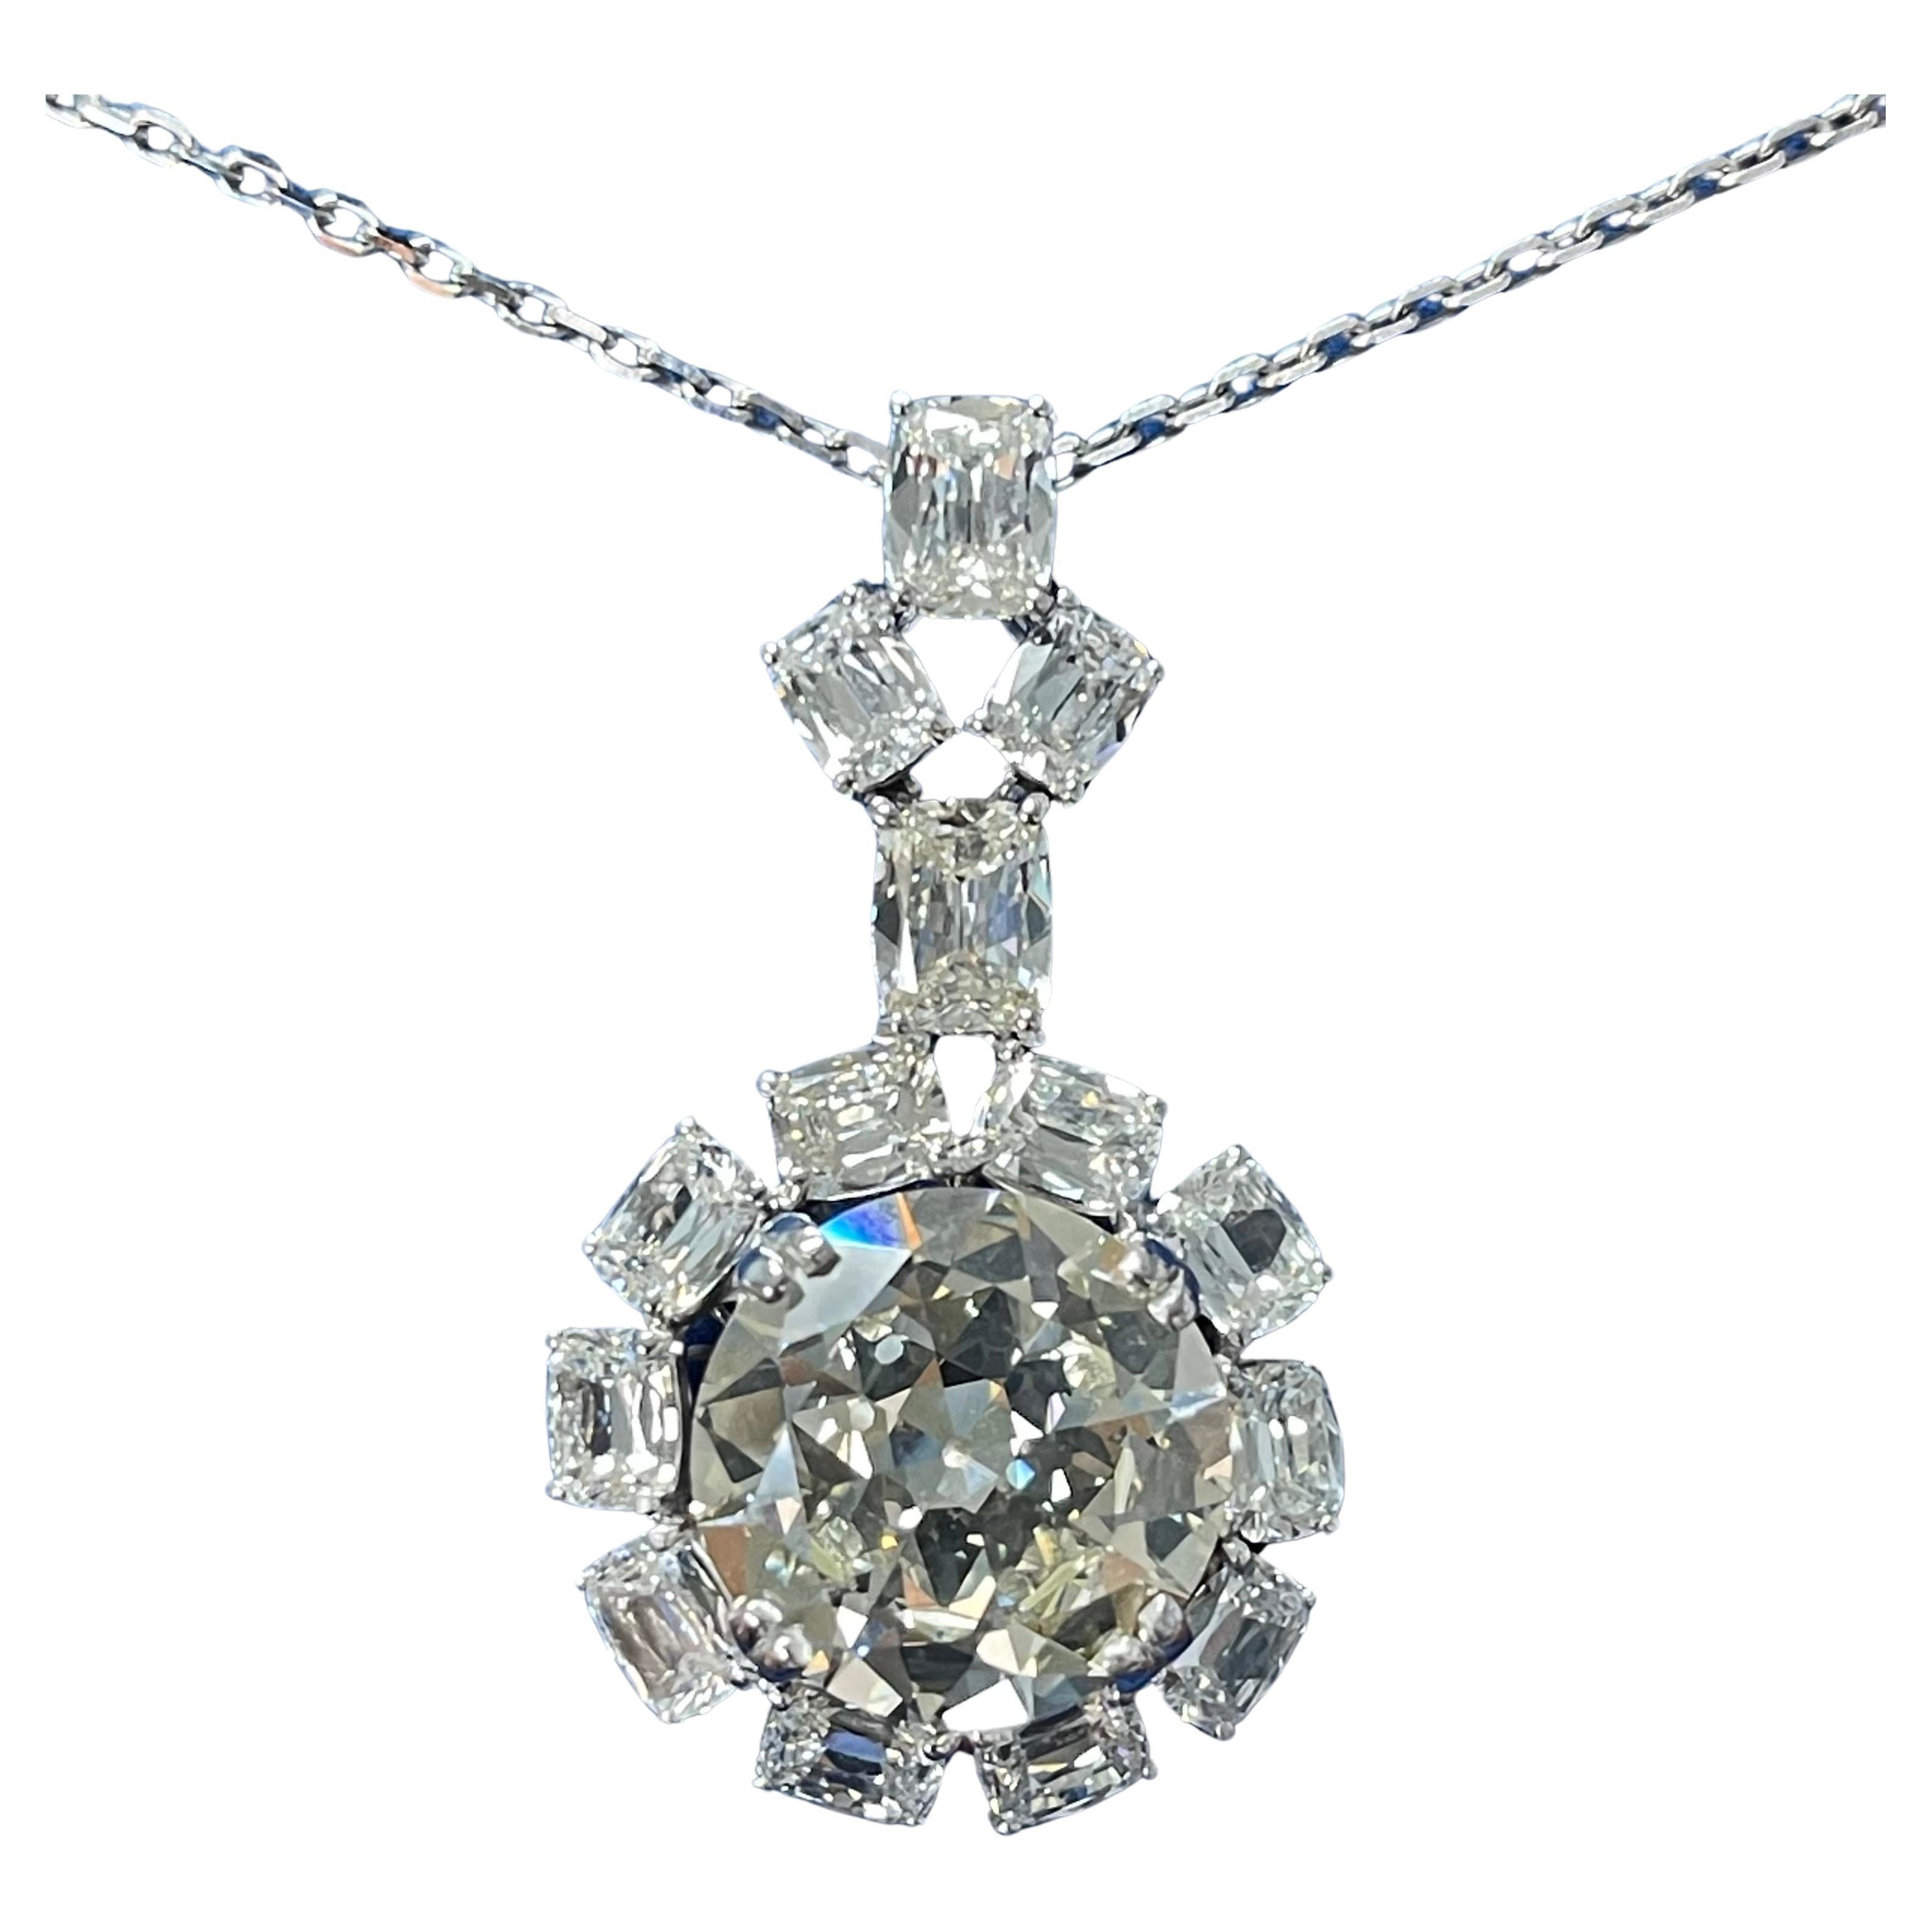 HRD Certified 9.56 Carat Old Mine Cut Diamond Necklace In 18K White Gold.  For Sale